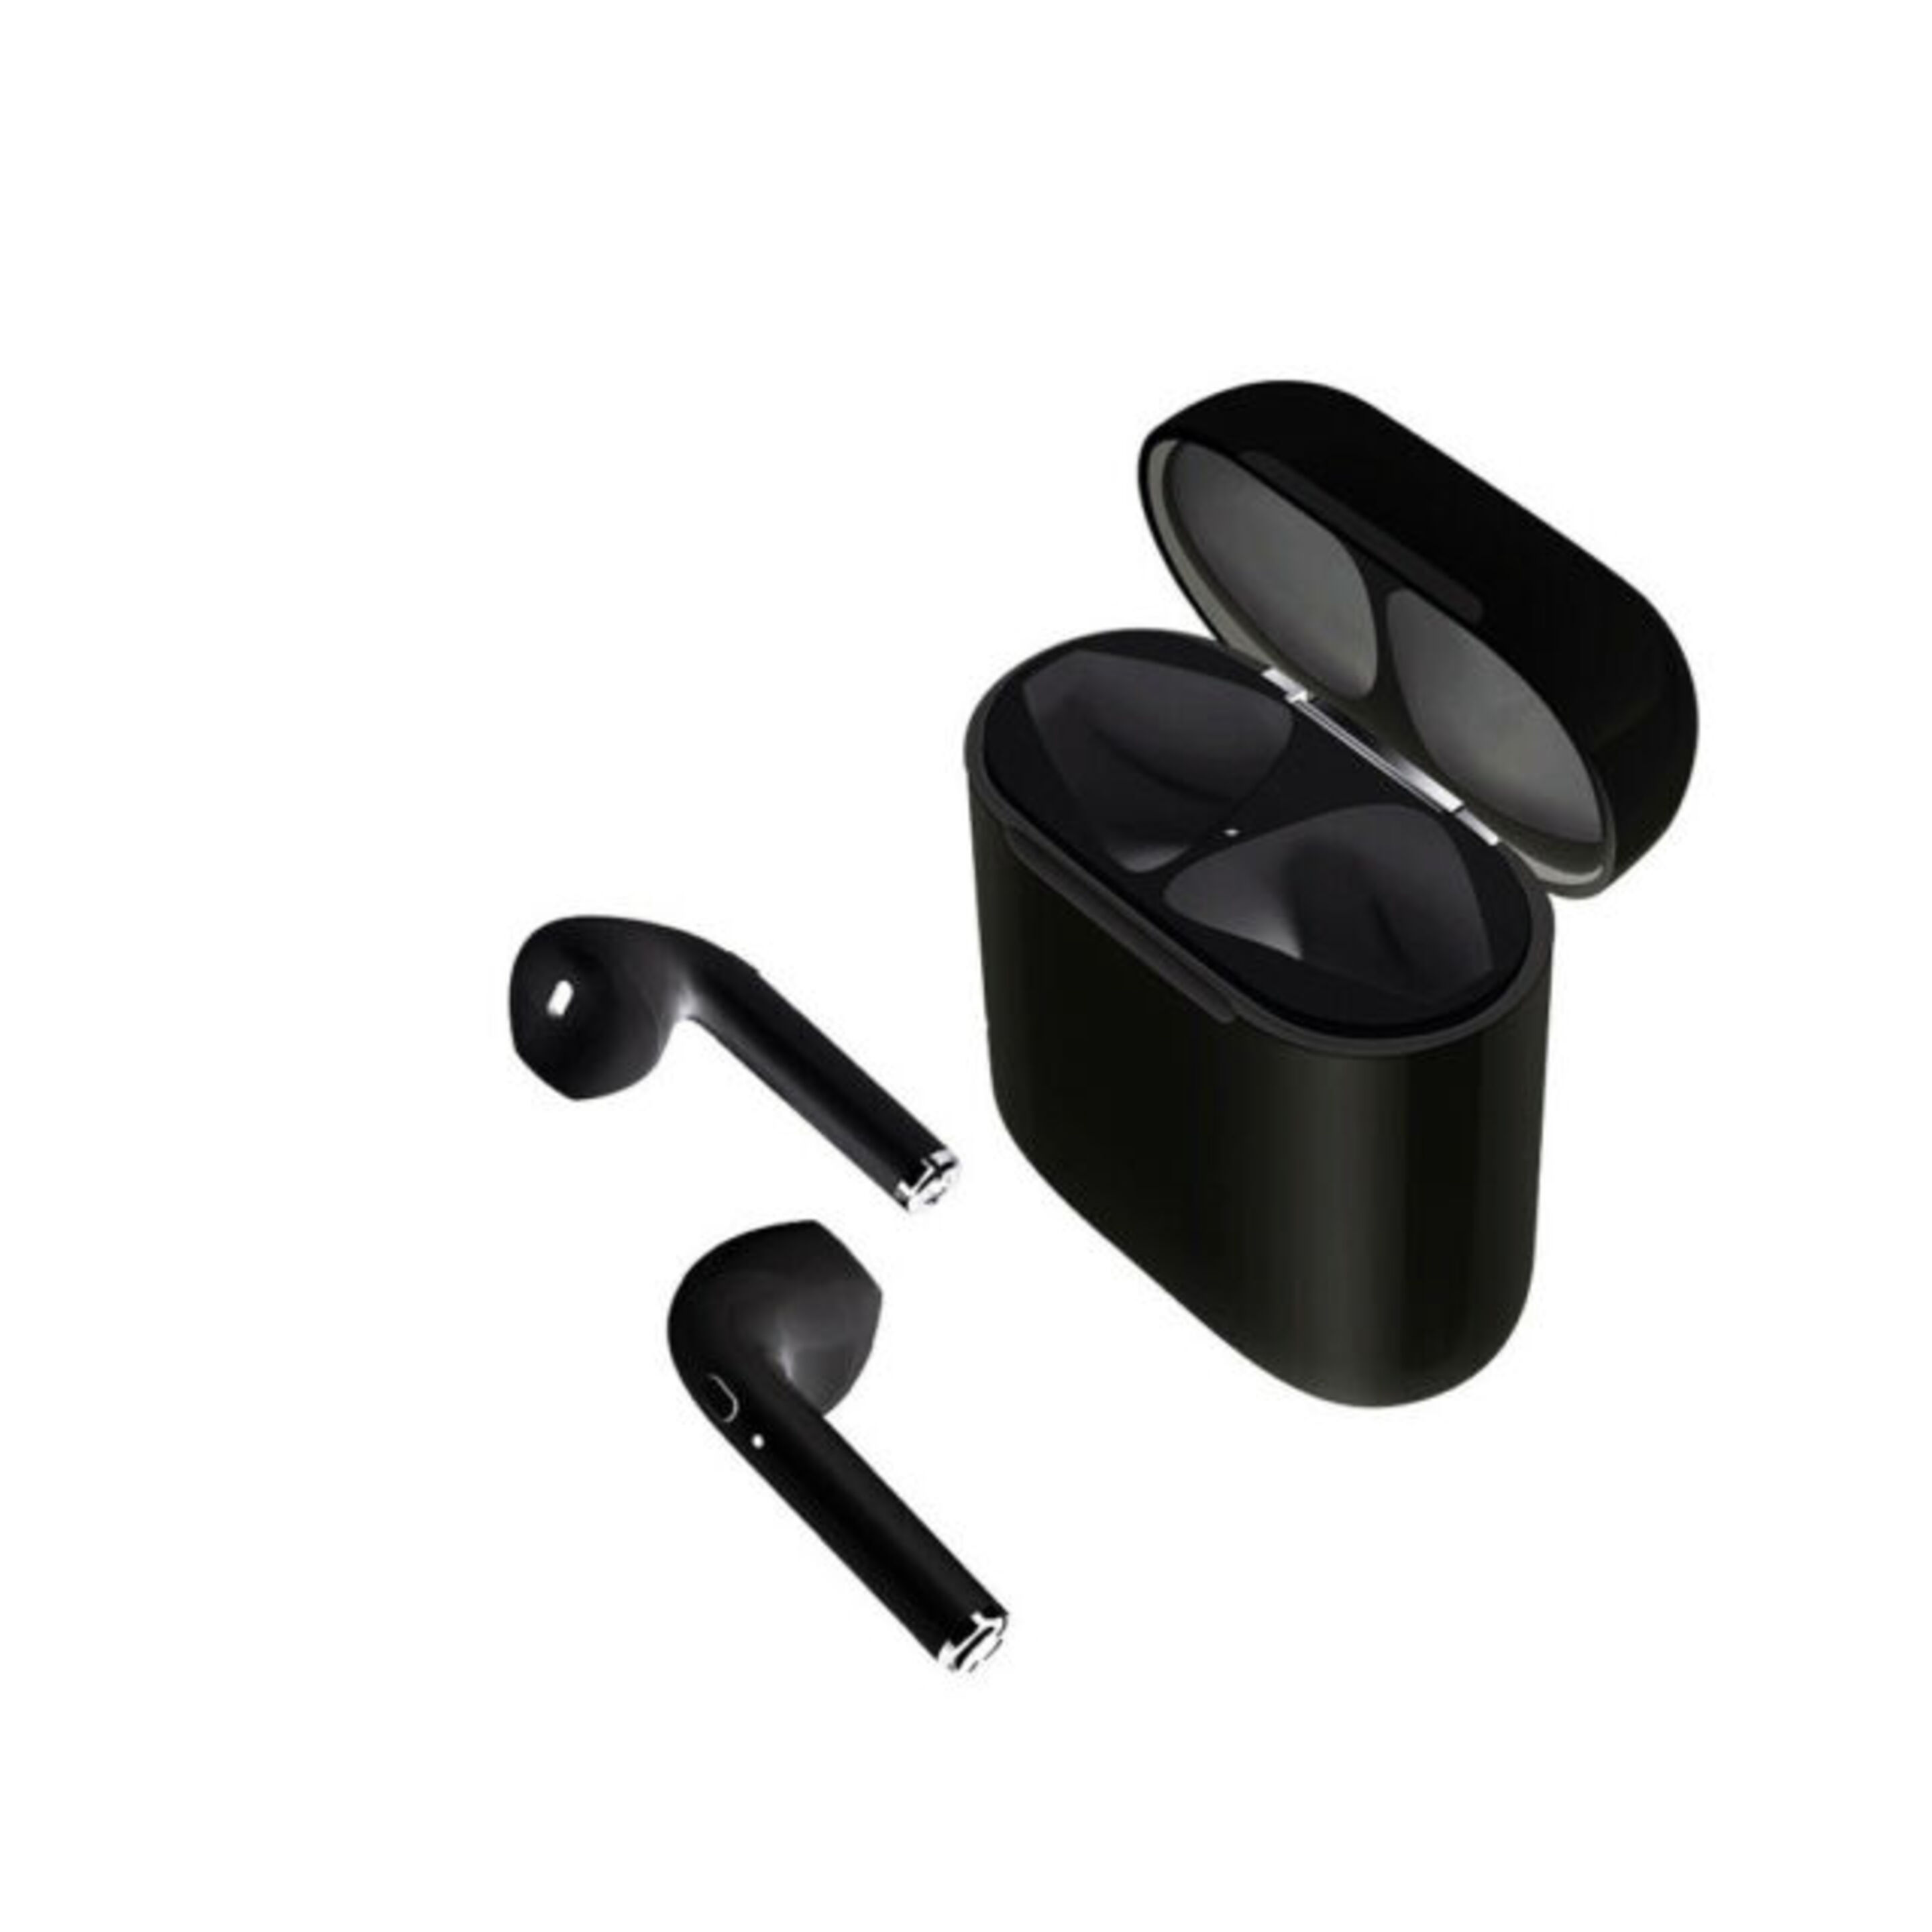 Auriculares Estéreo Wireless Muvit - negro - 